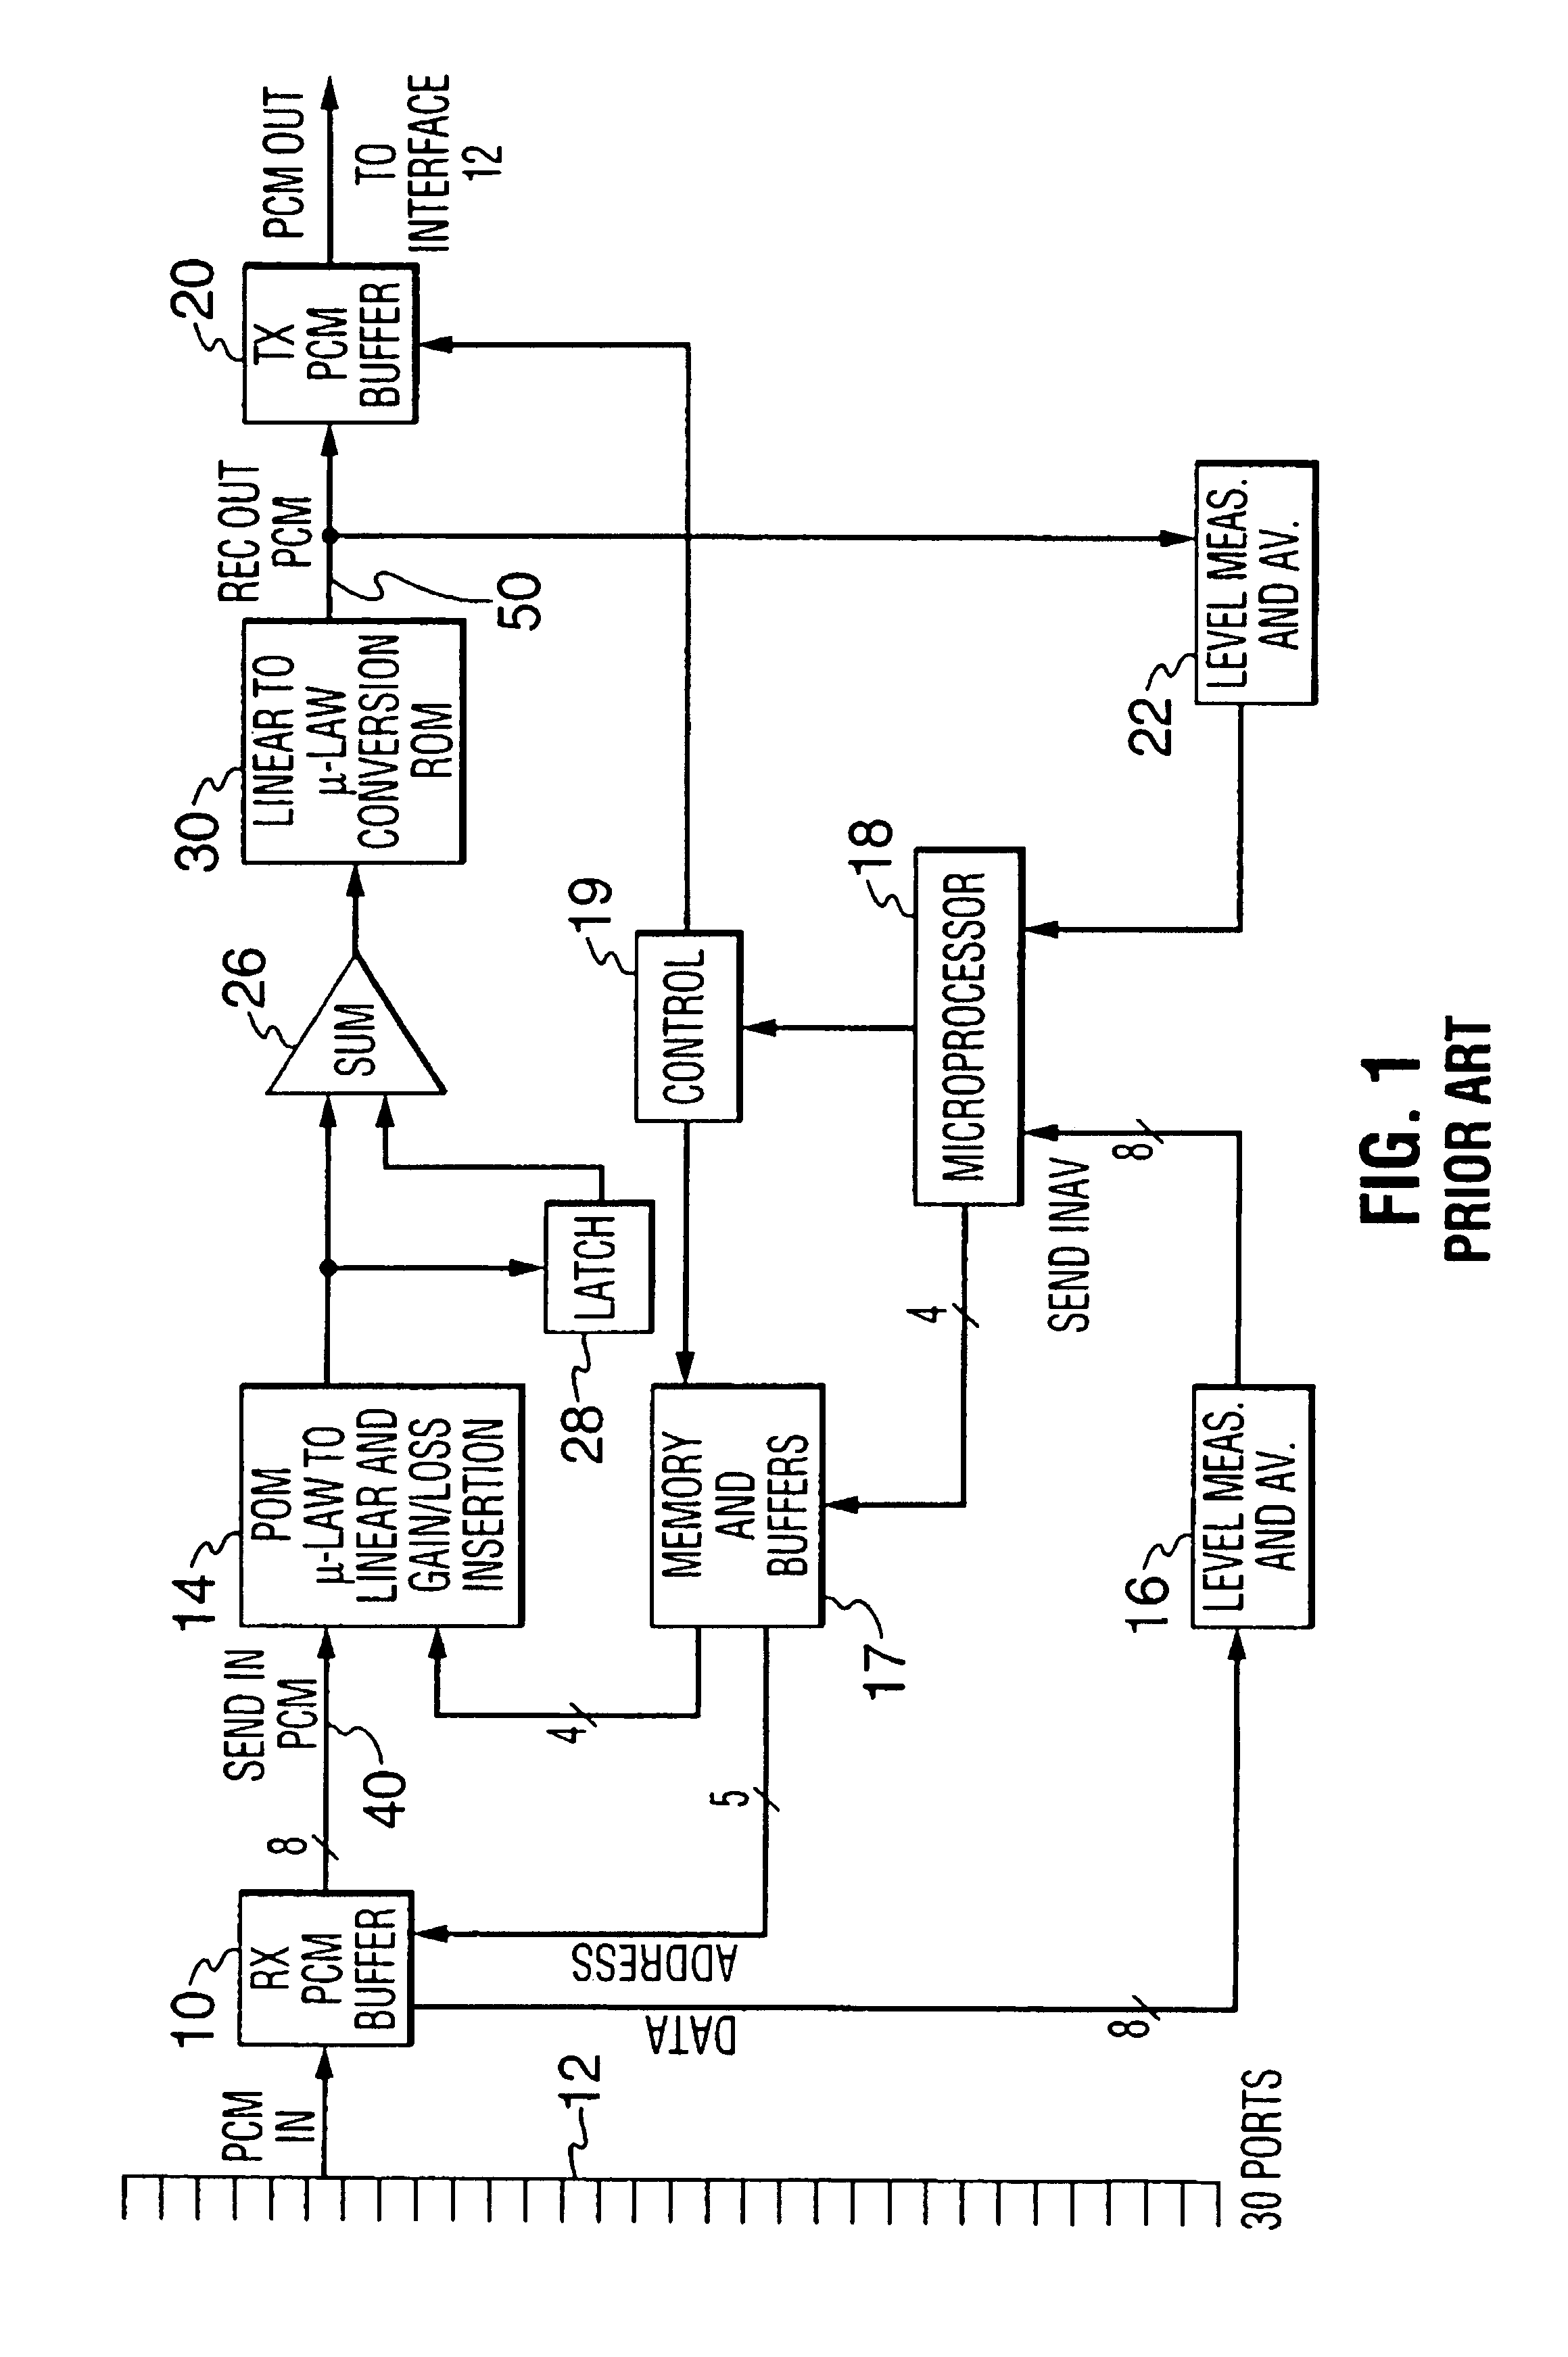 Method of improving conferencing in telephony